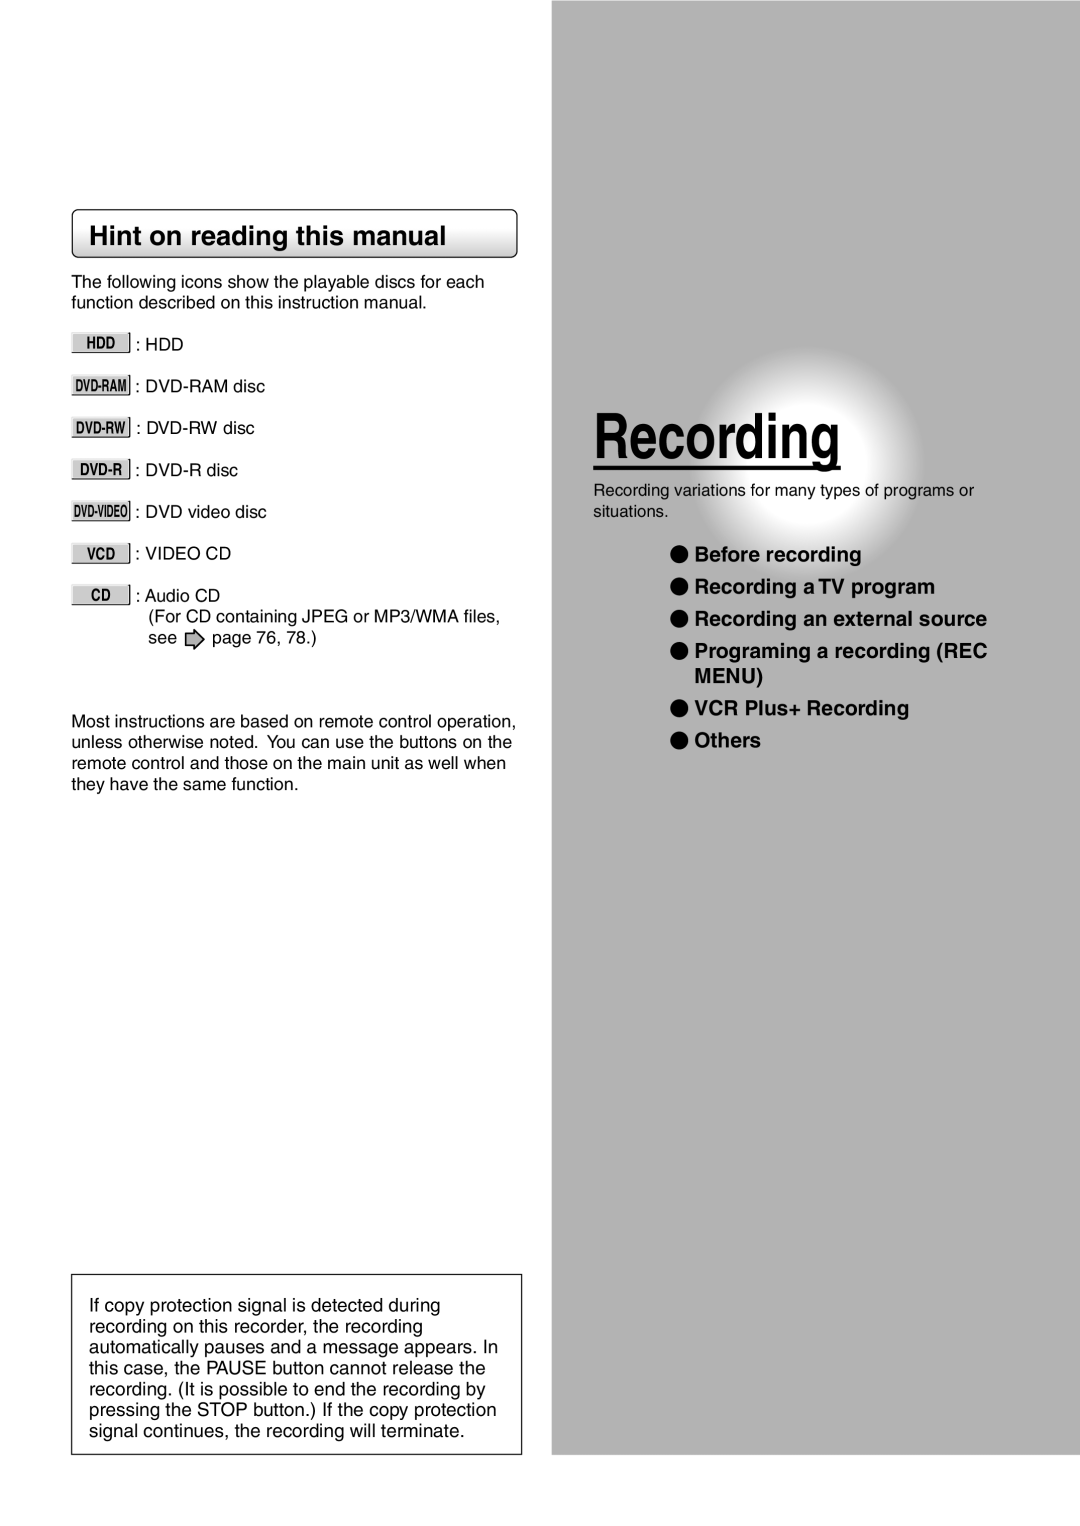 Toshiba RD-XS32SU Hint on reading this manual, Before recording Recording a TV program, Recording an external source 